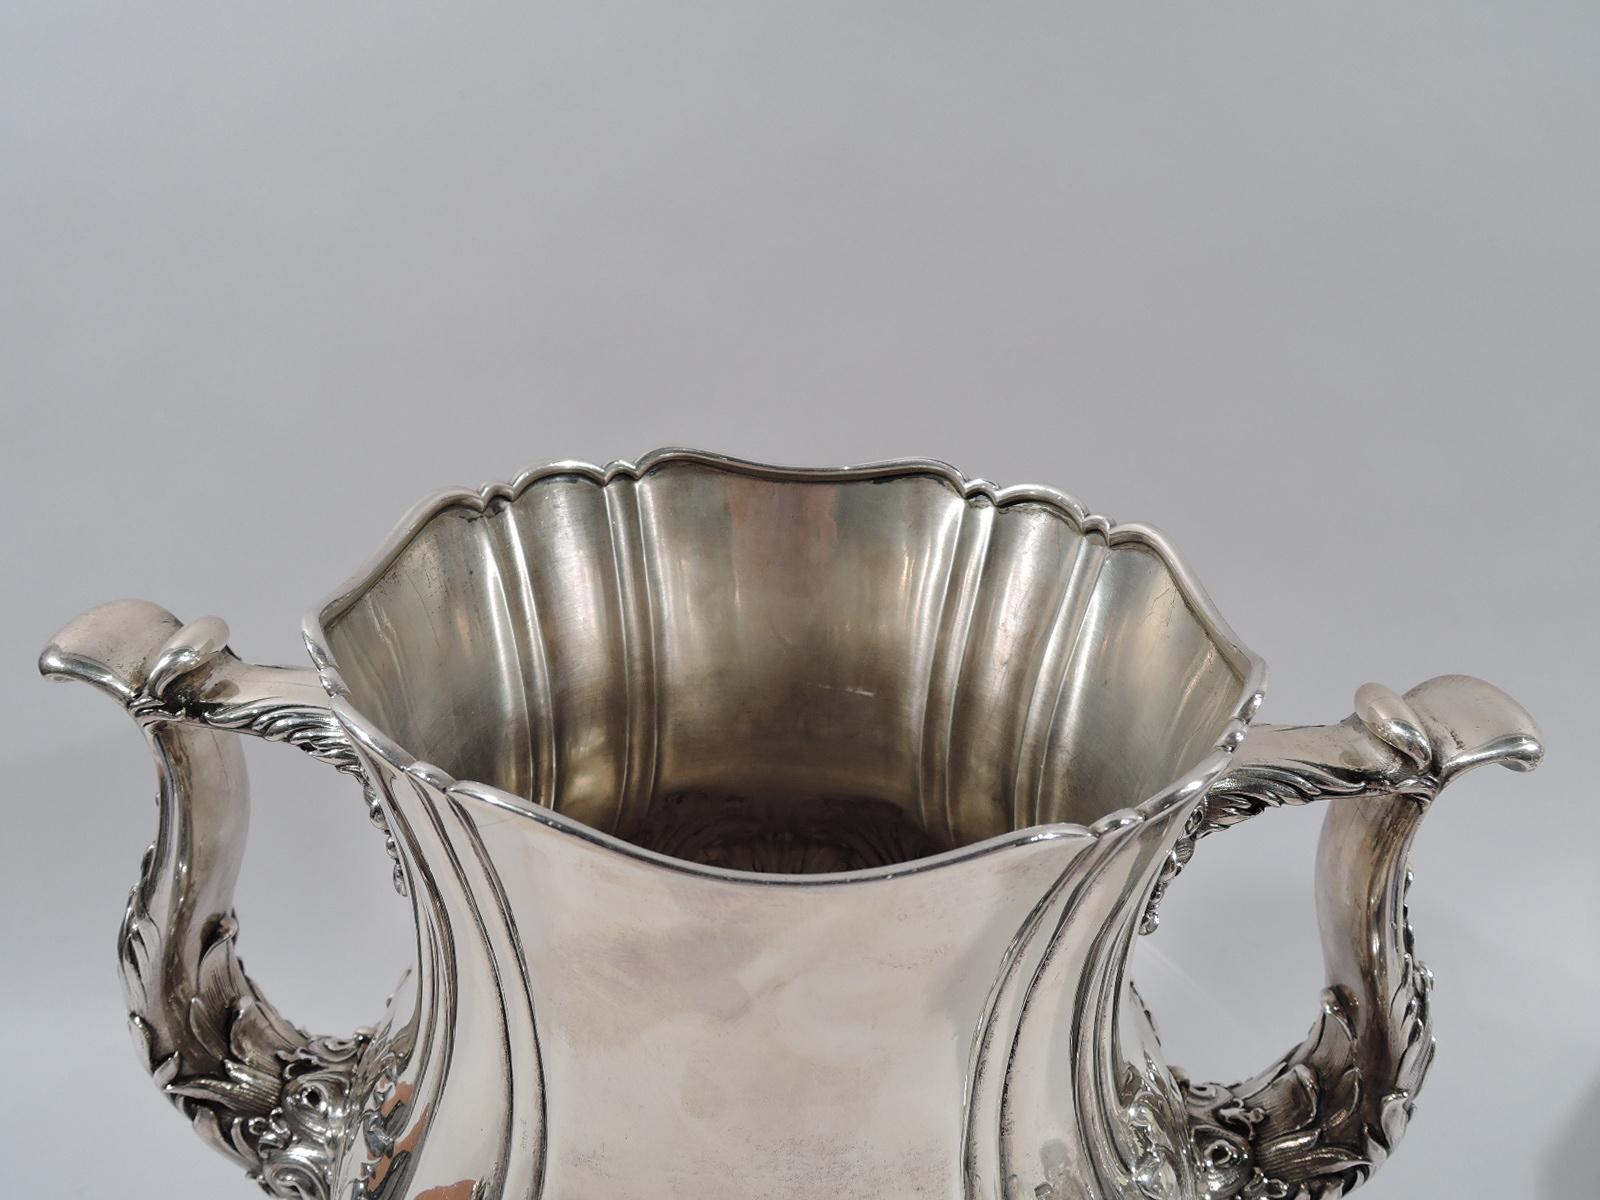 Turn of the century Classical sterling silver trophy. Made by Whiting in New York. Baluster body with scrolled rim and scroll-bracket side handles. Foot raised with scrolled rim. Body has vertical slash lines and dense and overlapping chased leaves.